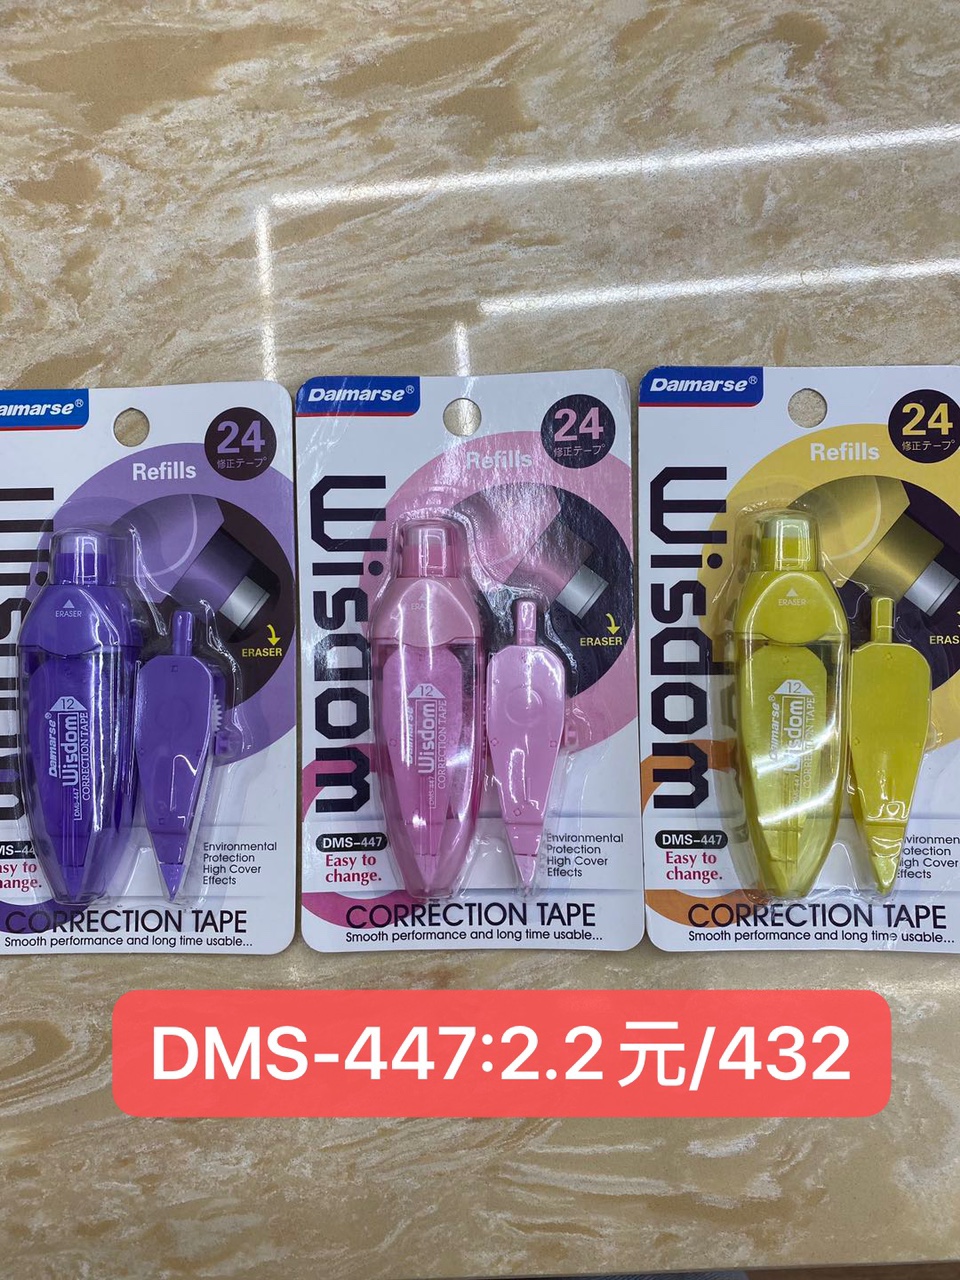 dms-447 learning stationery correction tape correction tape large capacity factory direct sales stationery school supplies